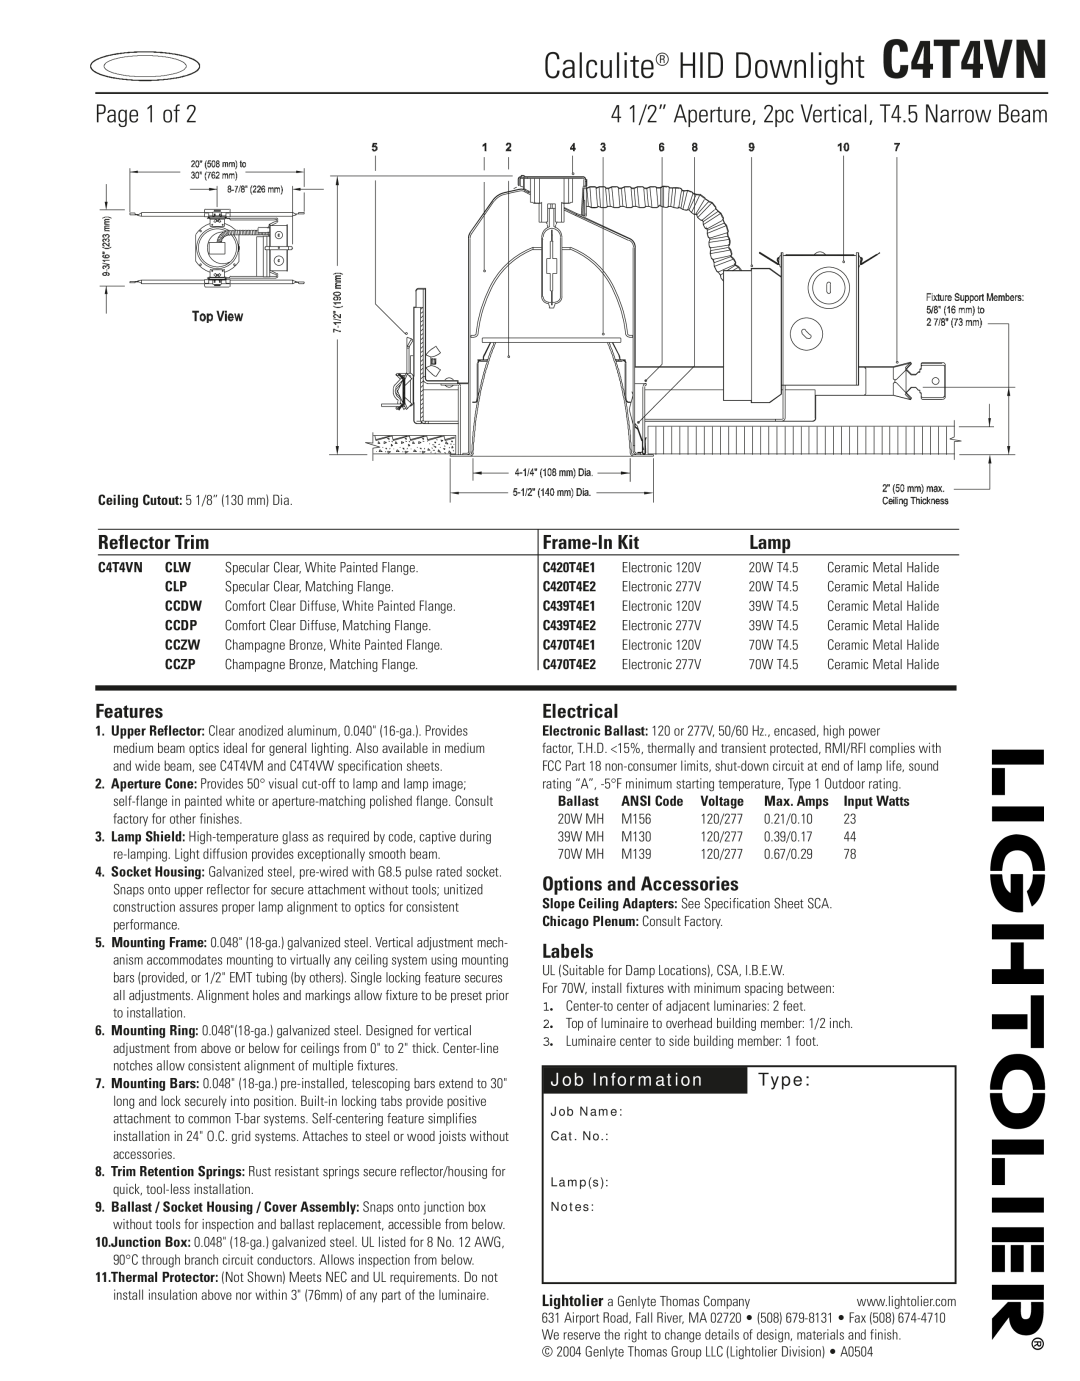 Lightolier specifications Calculite HID Downlight C4T4VN, Page 1 of, 4 1/2” Aperture, 2pc Vertical, T4.5 Narrow Beam 